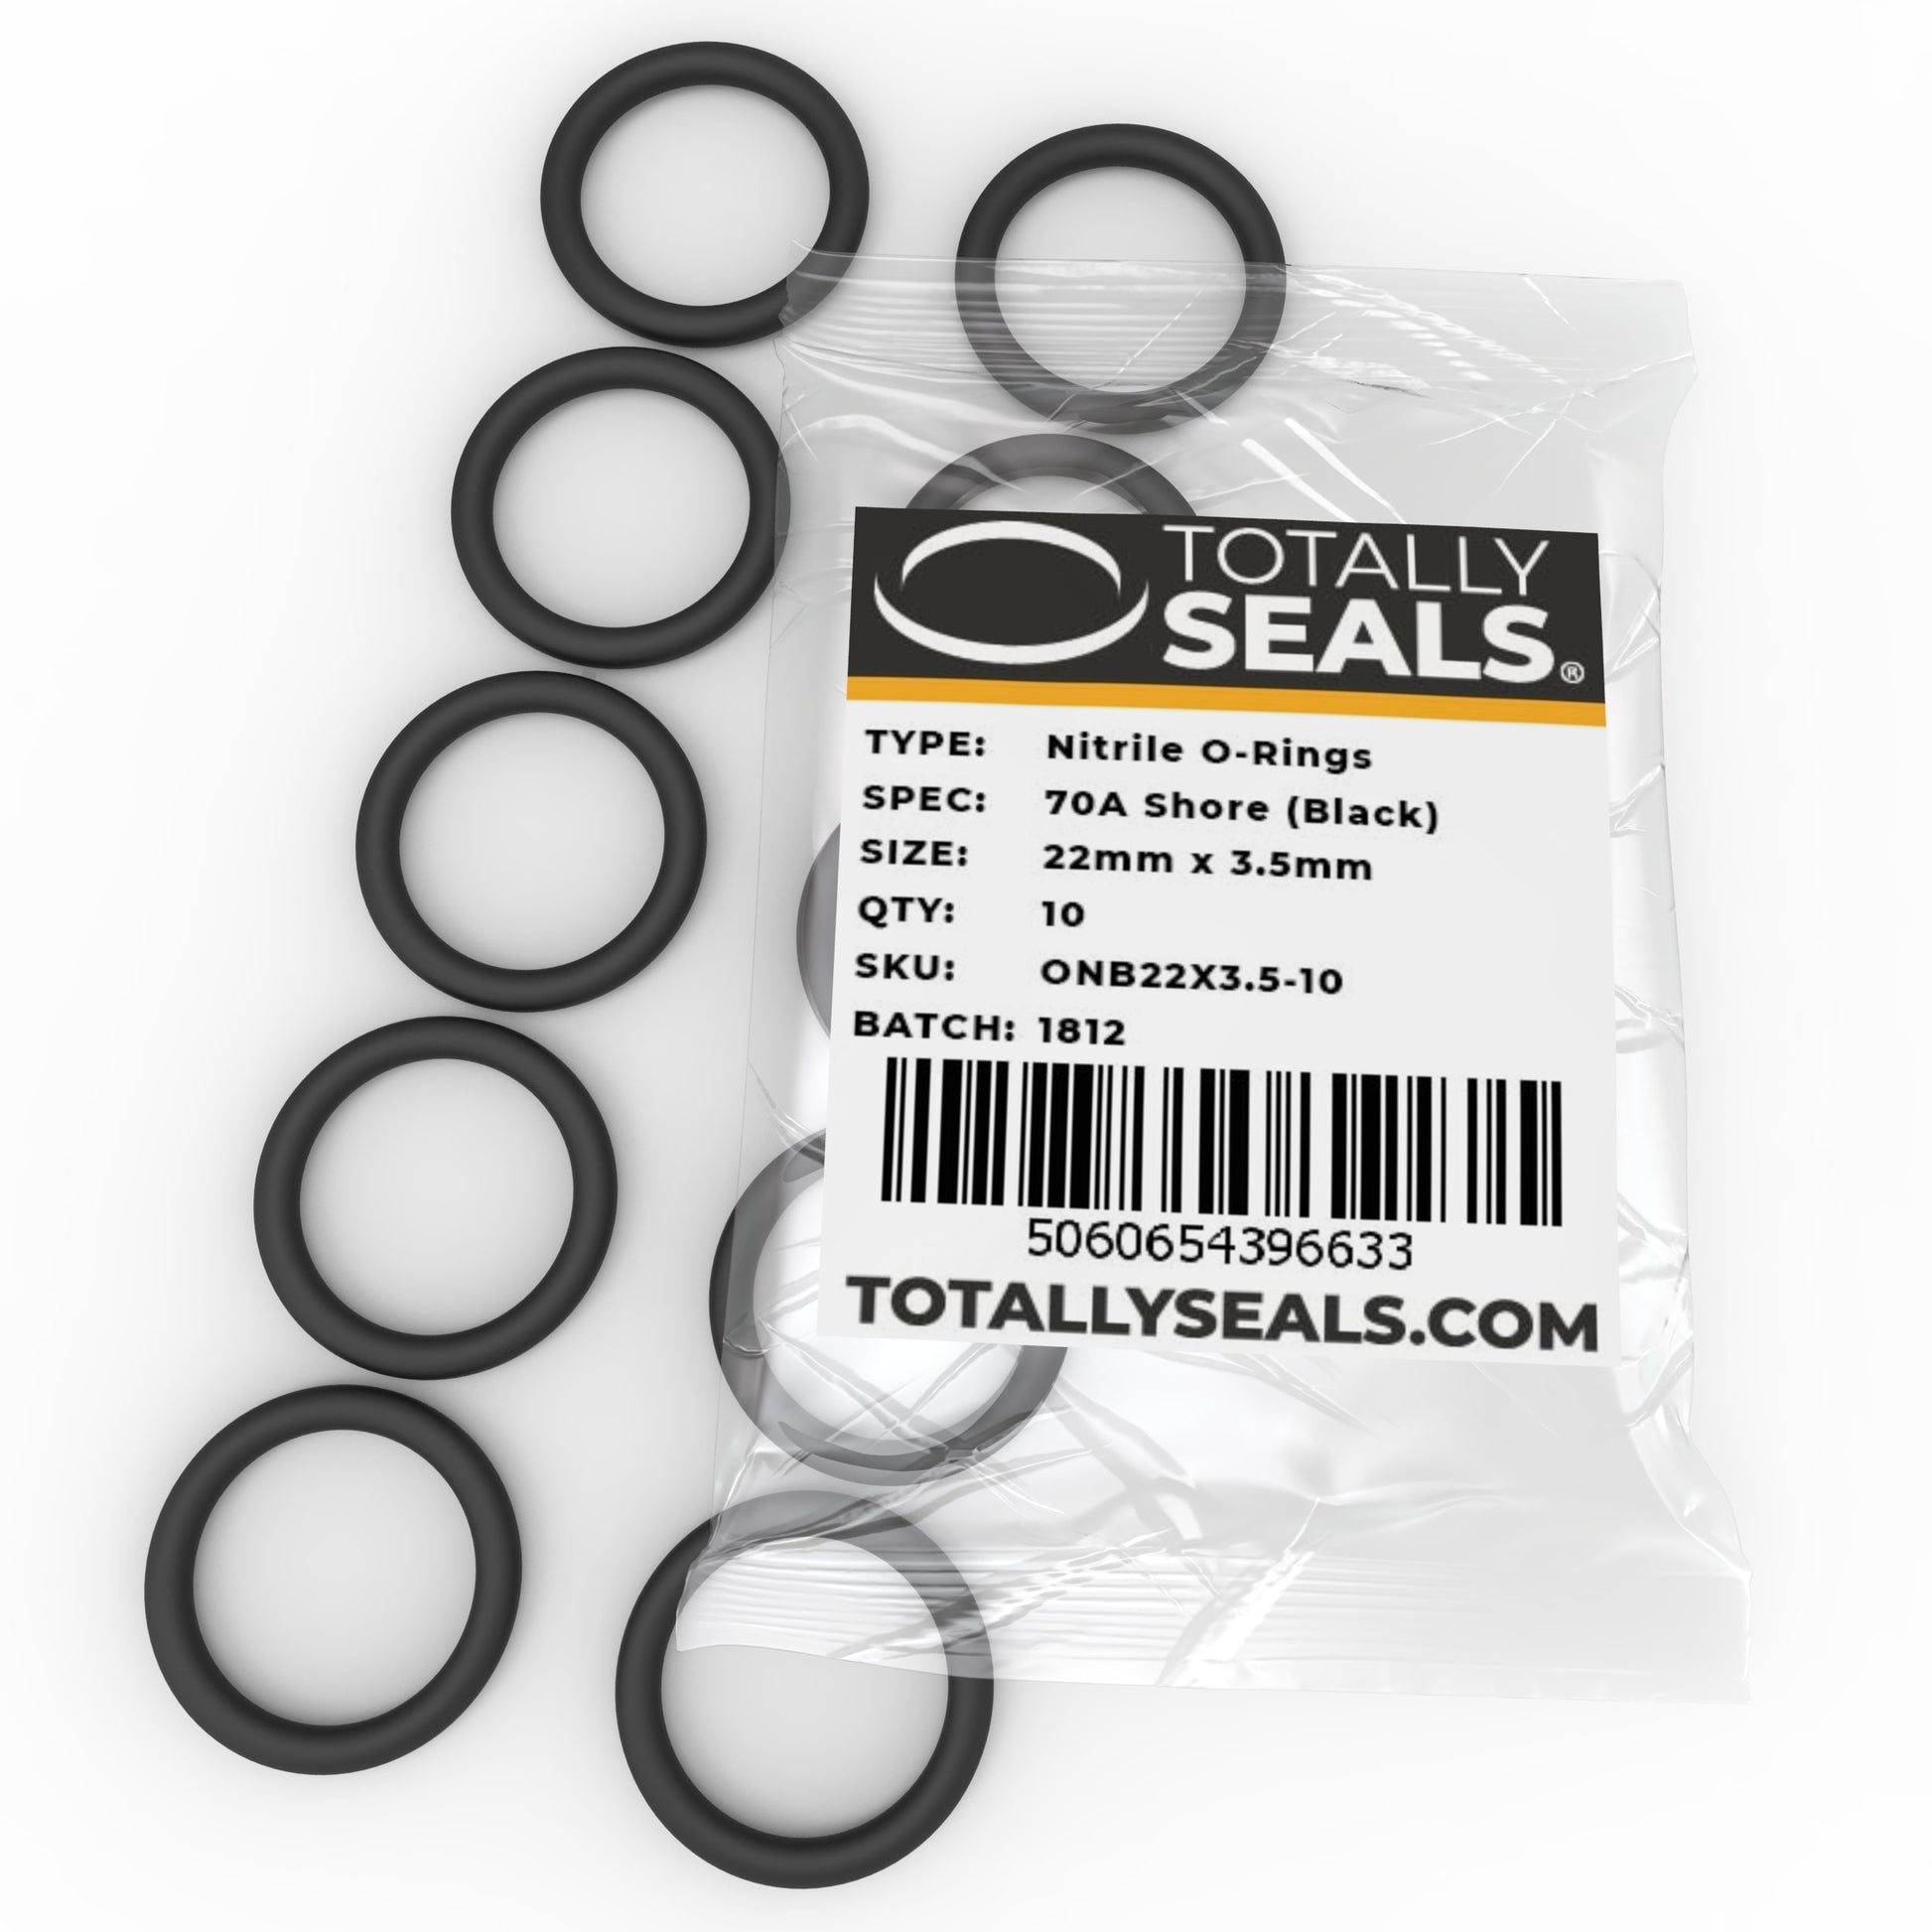 22mm x 3.5mm (29mm OD) Nitrile O-Rings - Totally Seals®